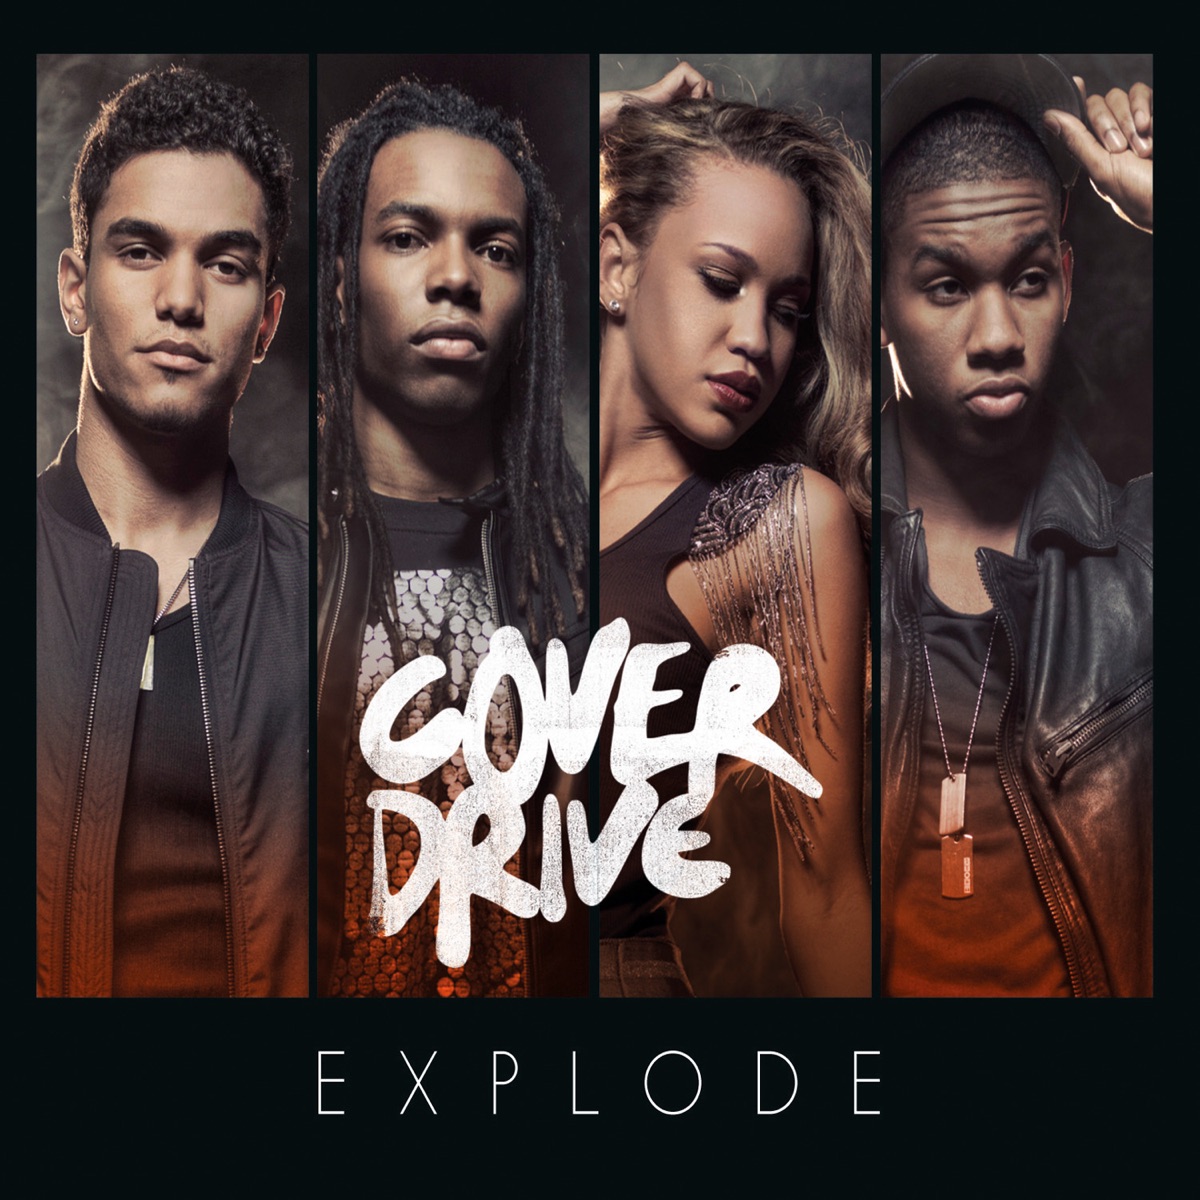 Cover Drive featuring Dappy — Explode cover artwork